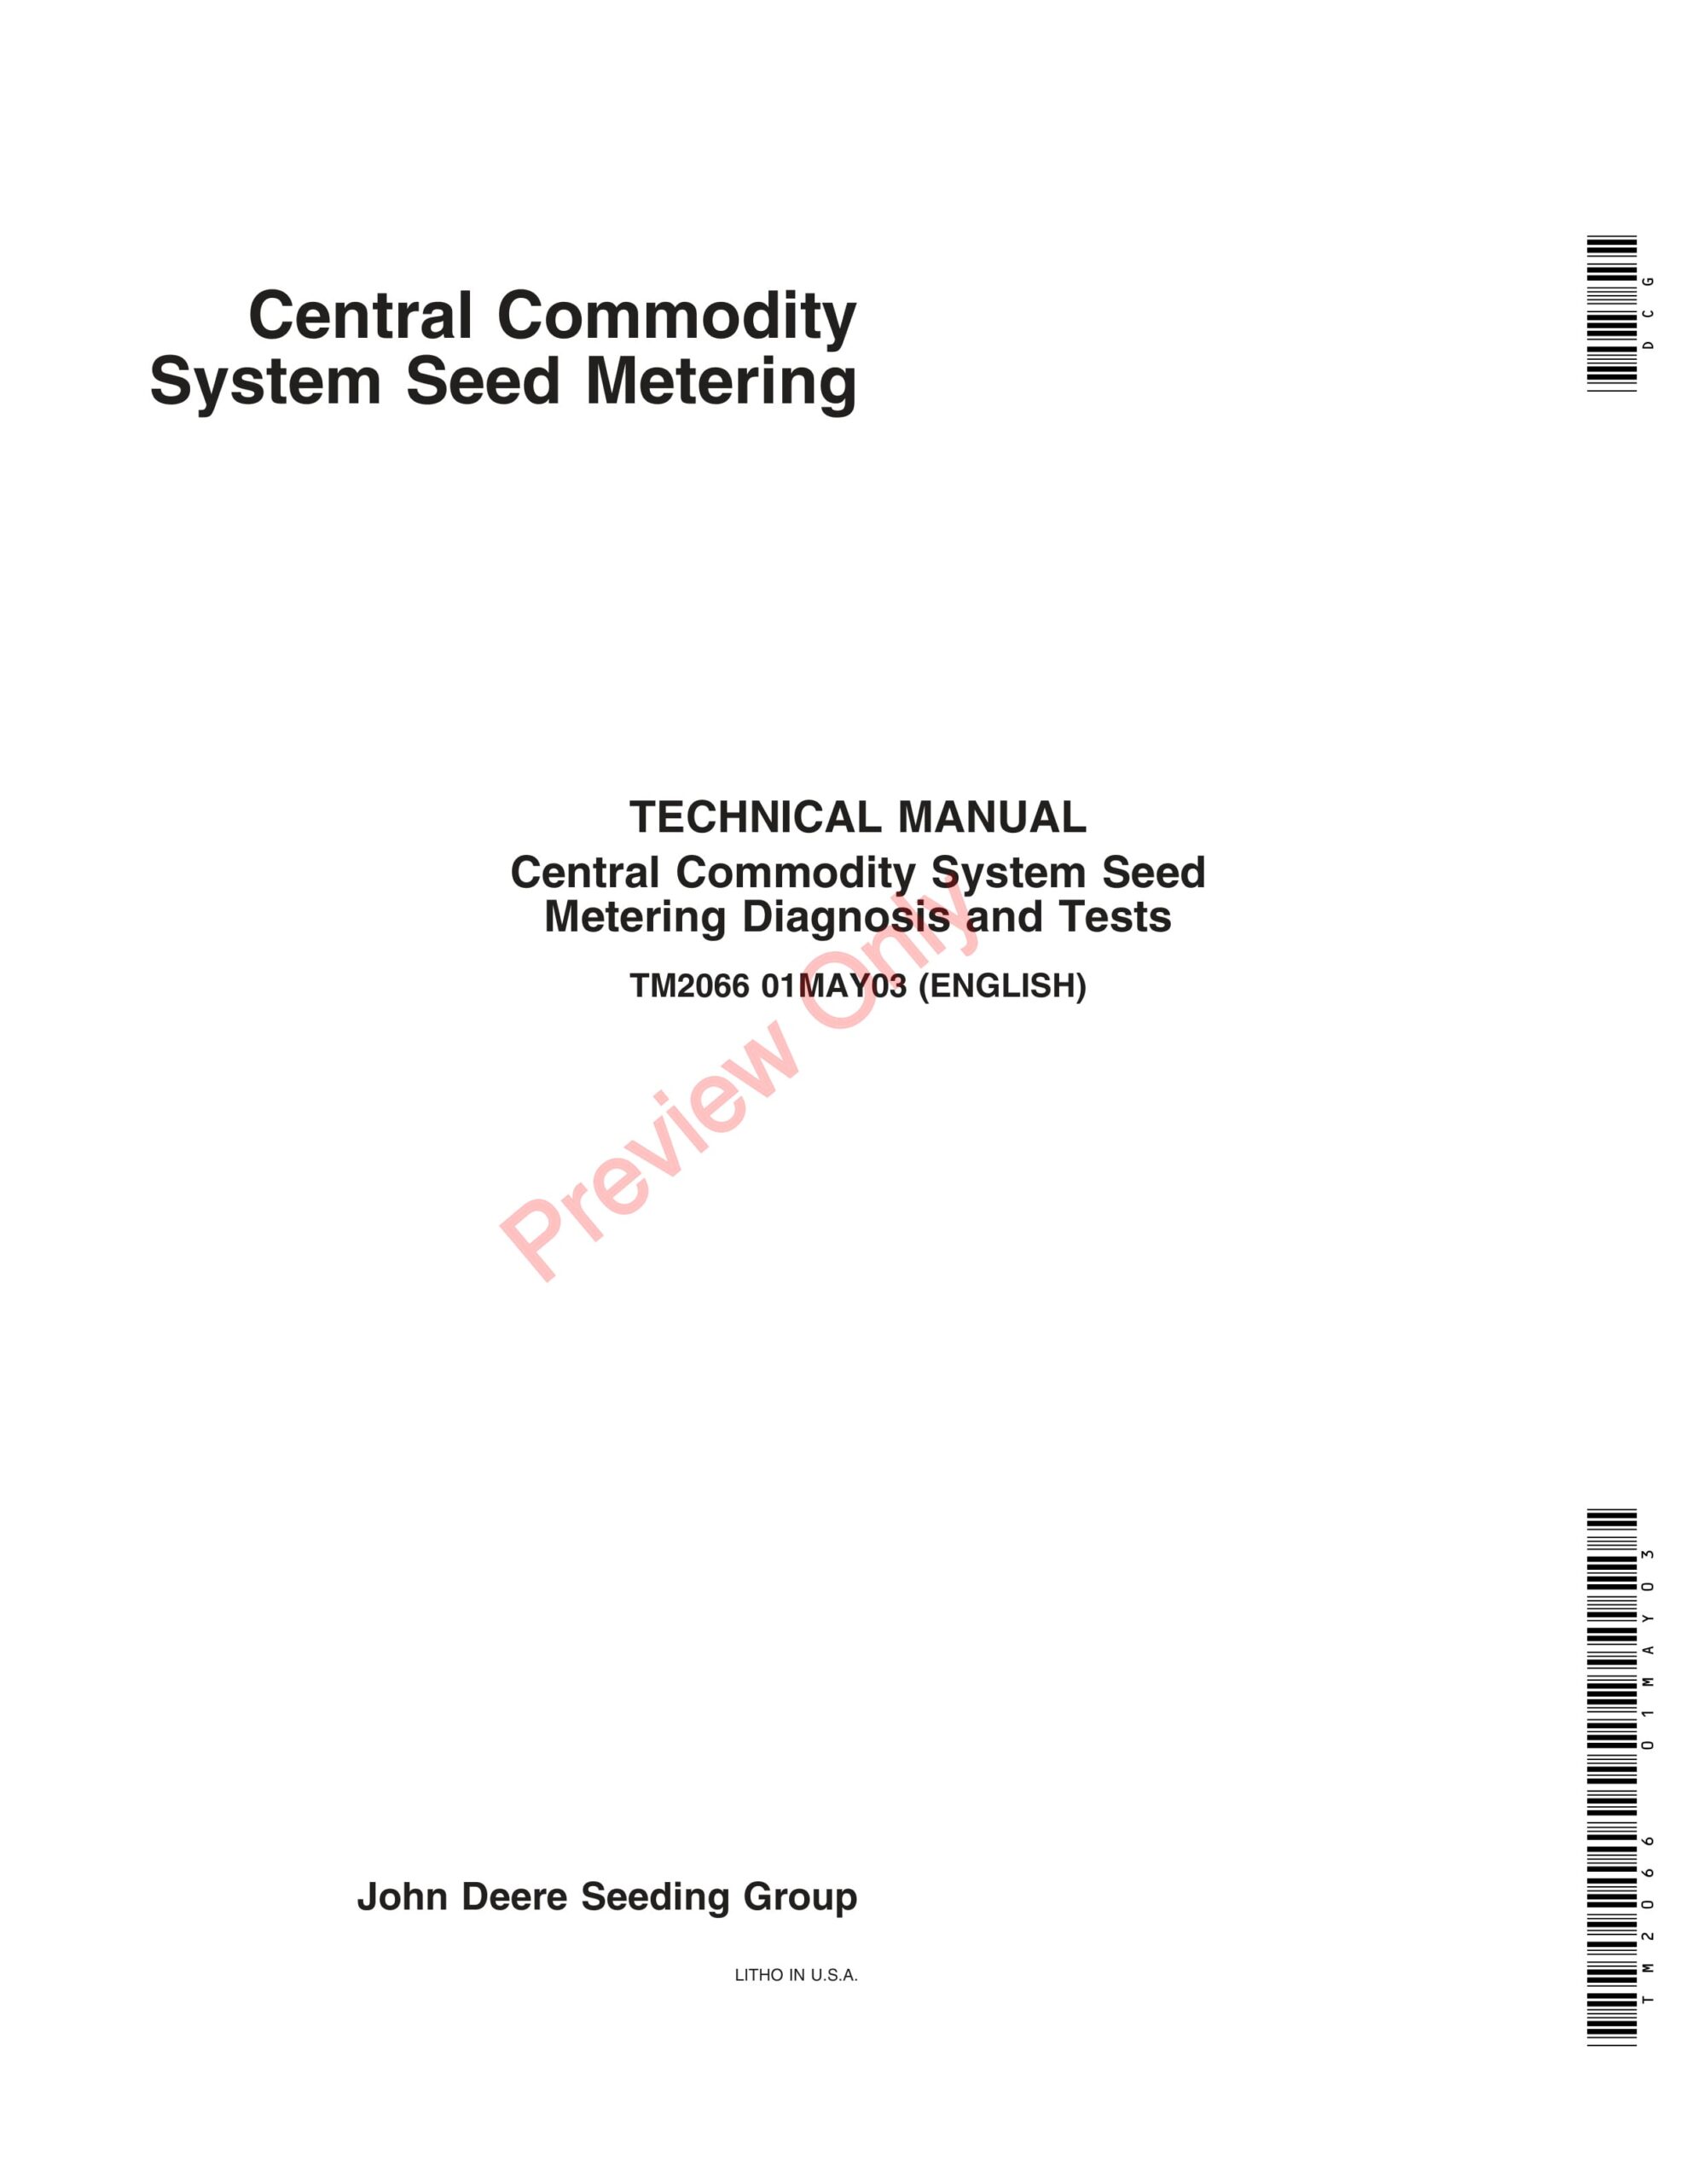 John Deere Central Commodity System Seed Metering Technical Manual TM2066 01MAY03-1